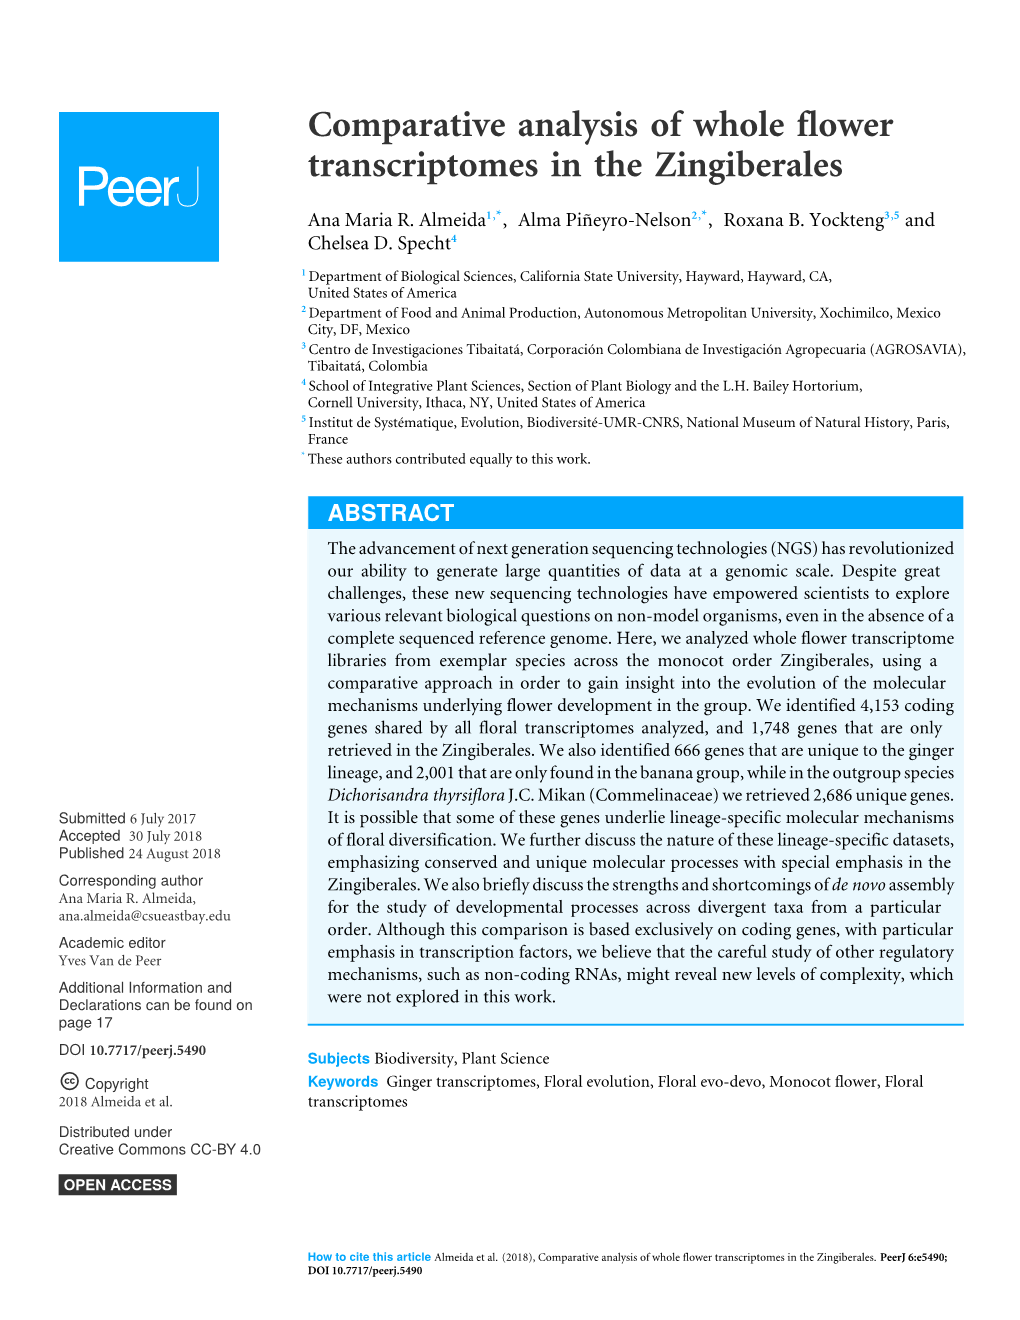 Comparative Analysis of Whole Flower Transcriptomes in the Zingiberales